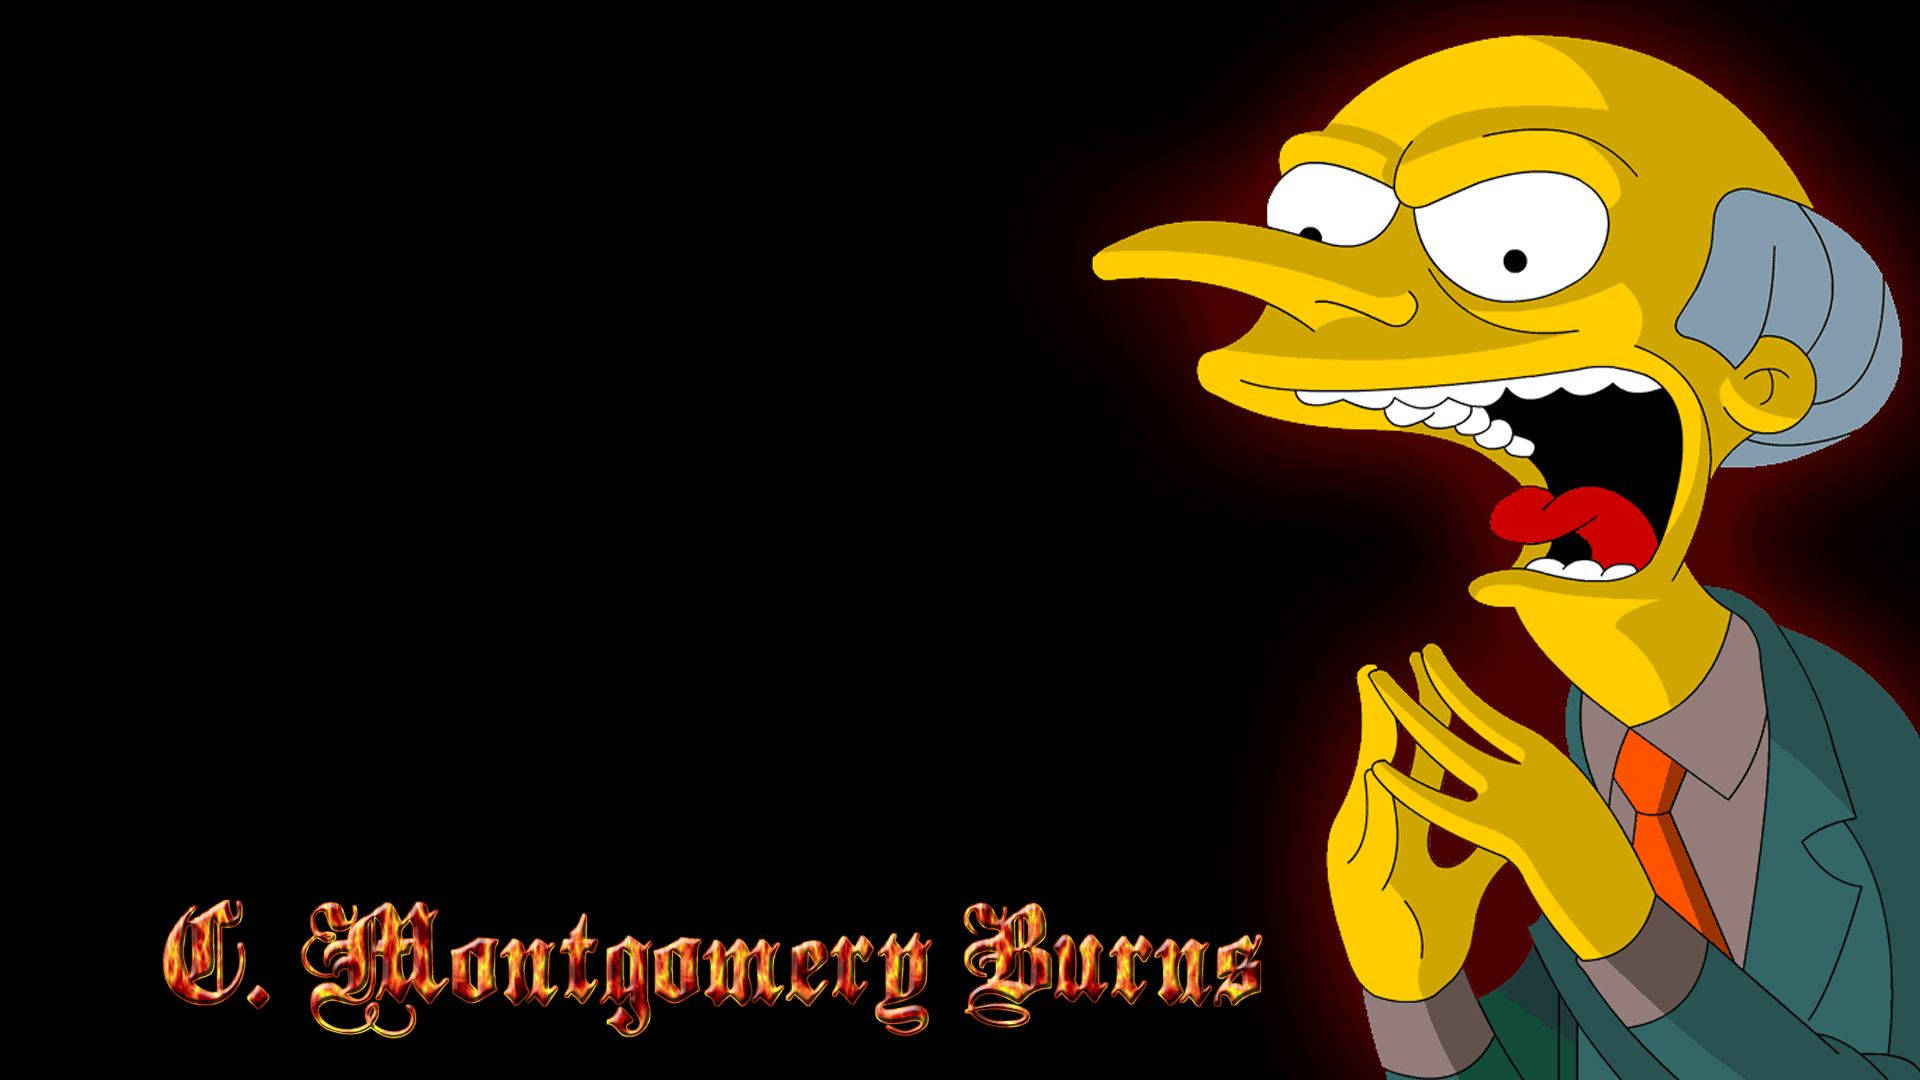 Mr. Burns From The Simpsons Wallpaper